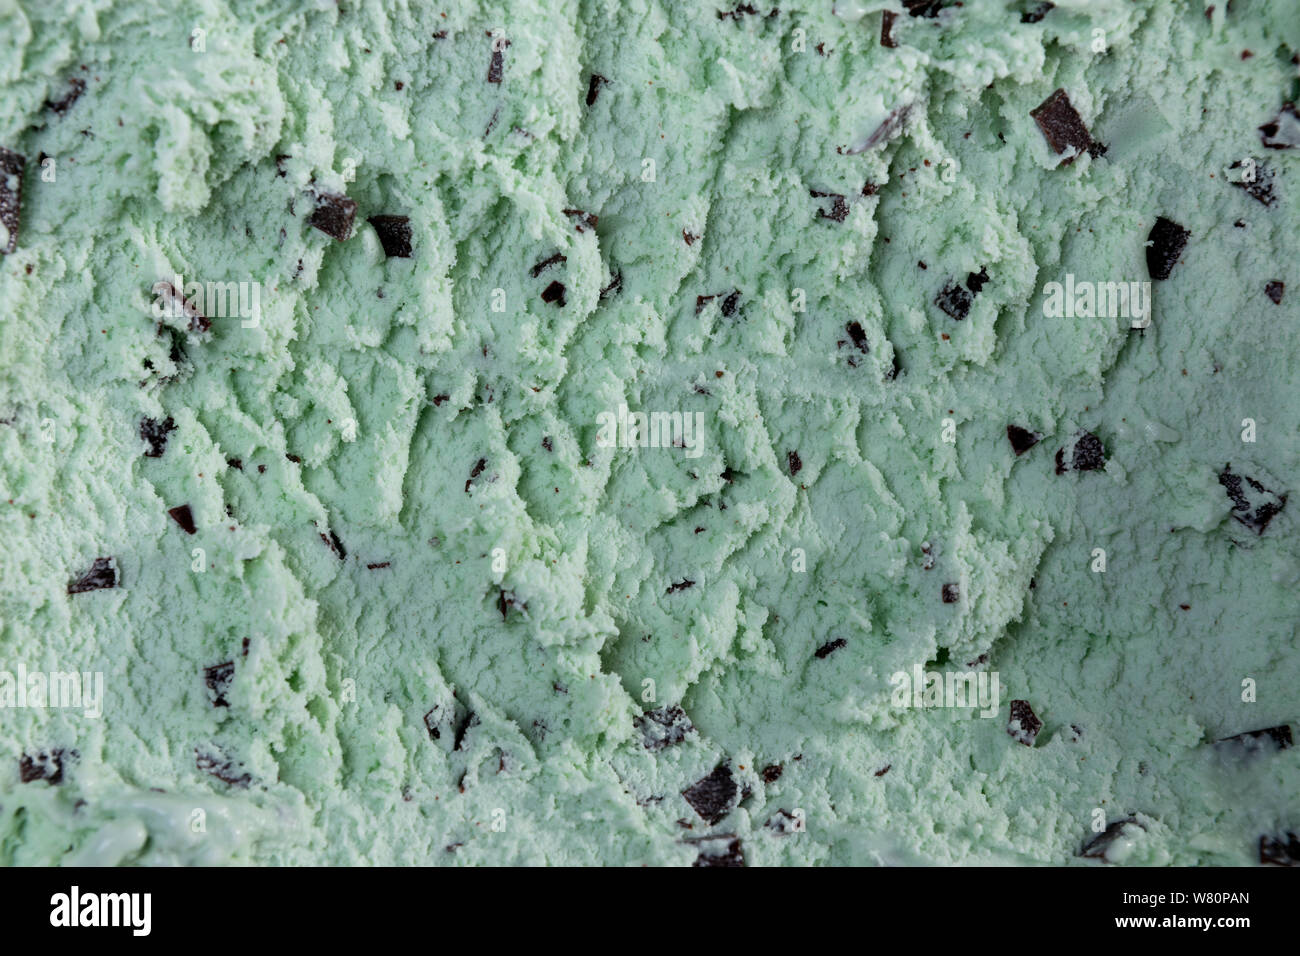 Top view of mint flavour ice cream with chocolate flakes in box Stock Photo